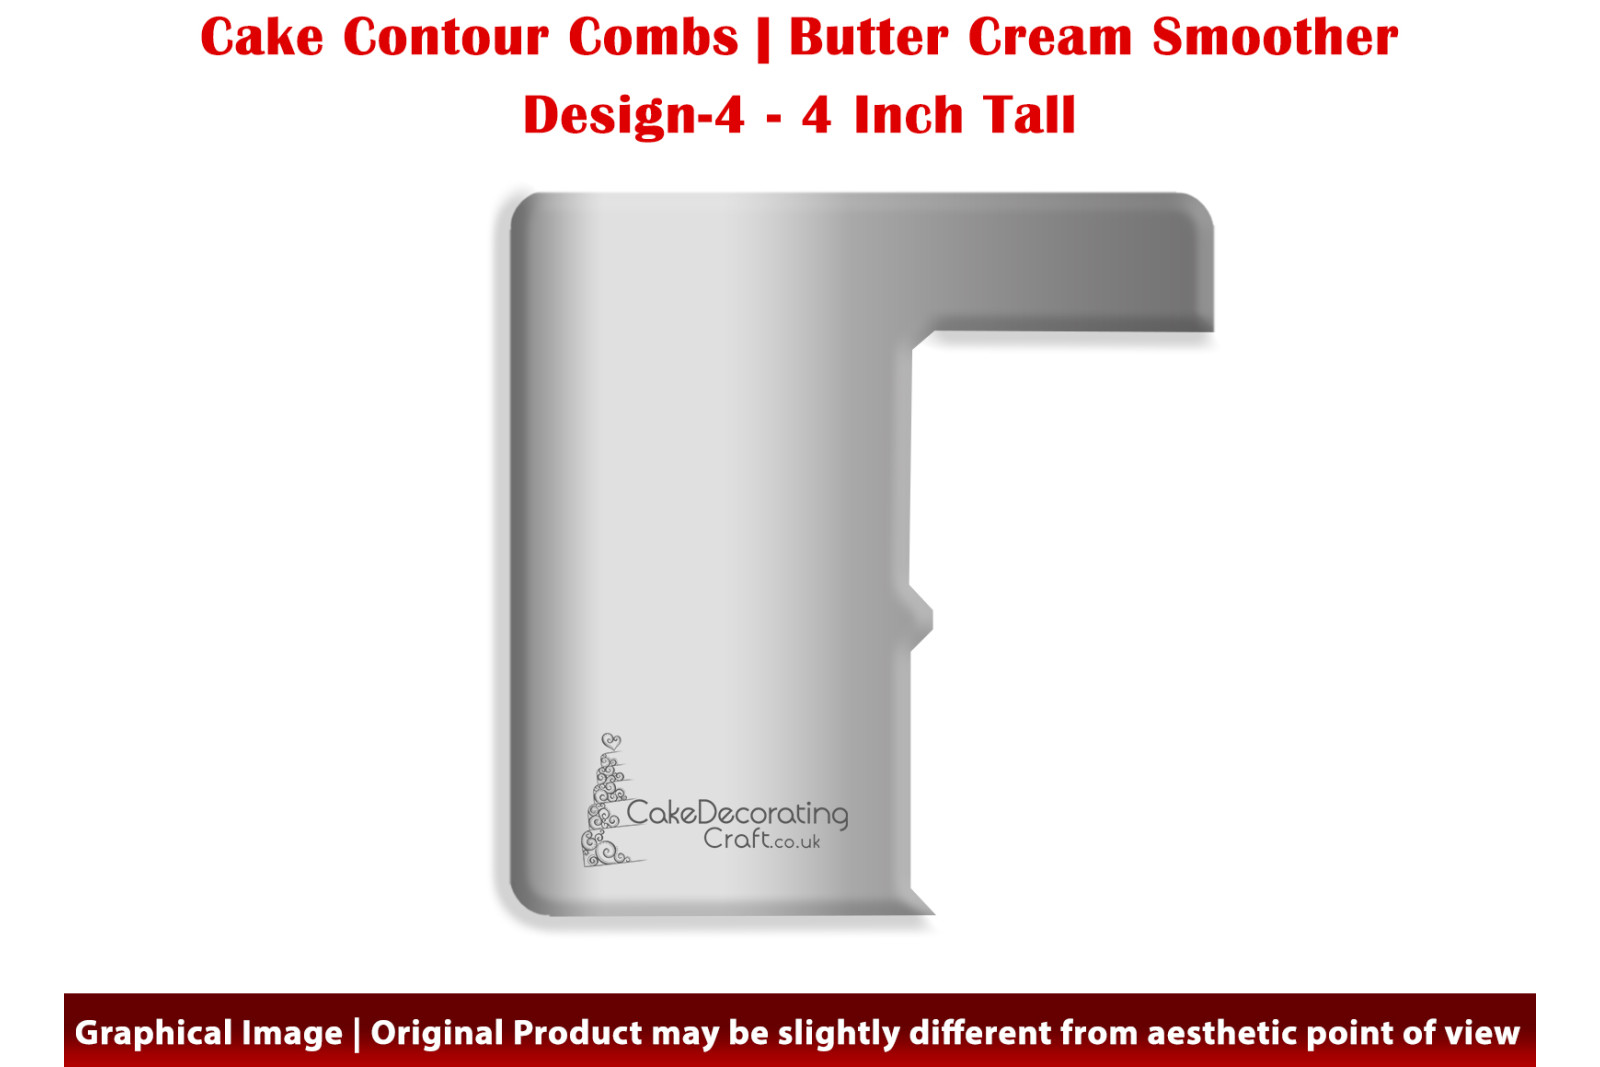 Book | Design 4 | 4 Inch | Cake Decorating Craft | Cake Contour Combs | Smoothing | Metal Spreader | Butter Cream Smoothing | Genius Tool